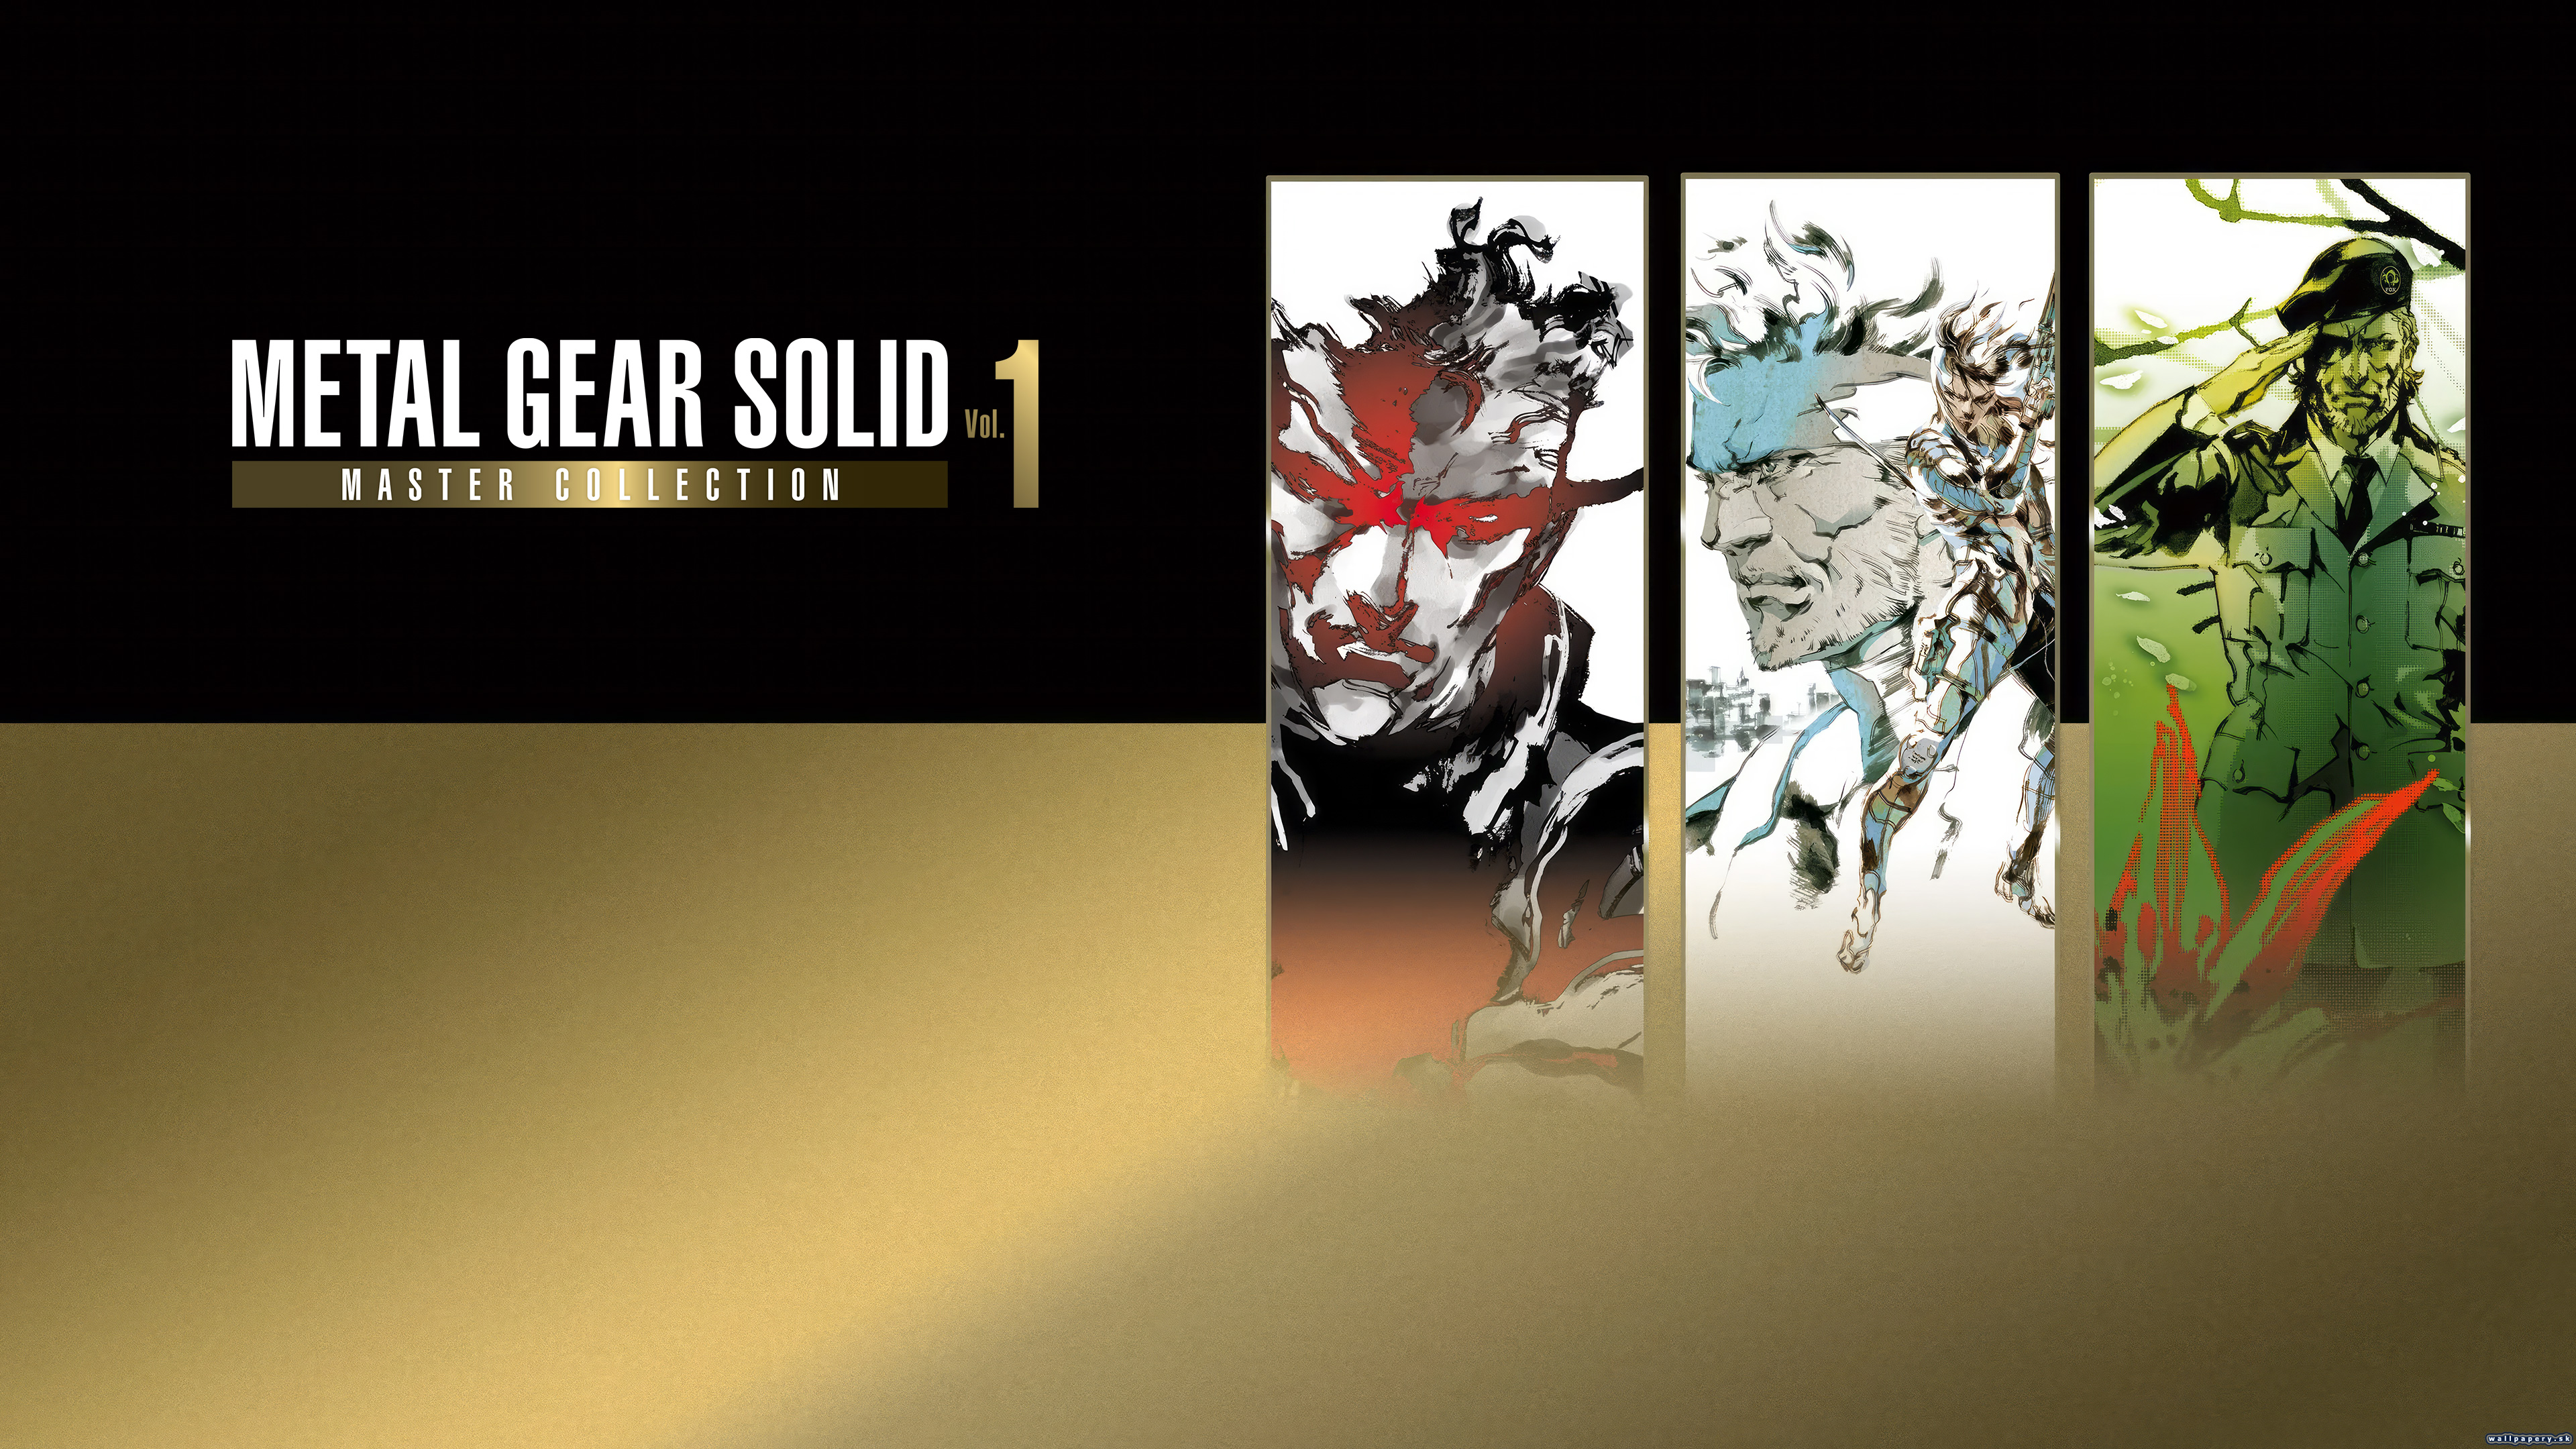 Metal Gear Solid: Master Collection - Vol. 1 - wallpaper 1